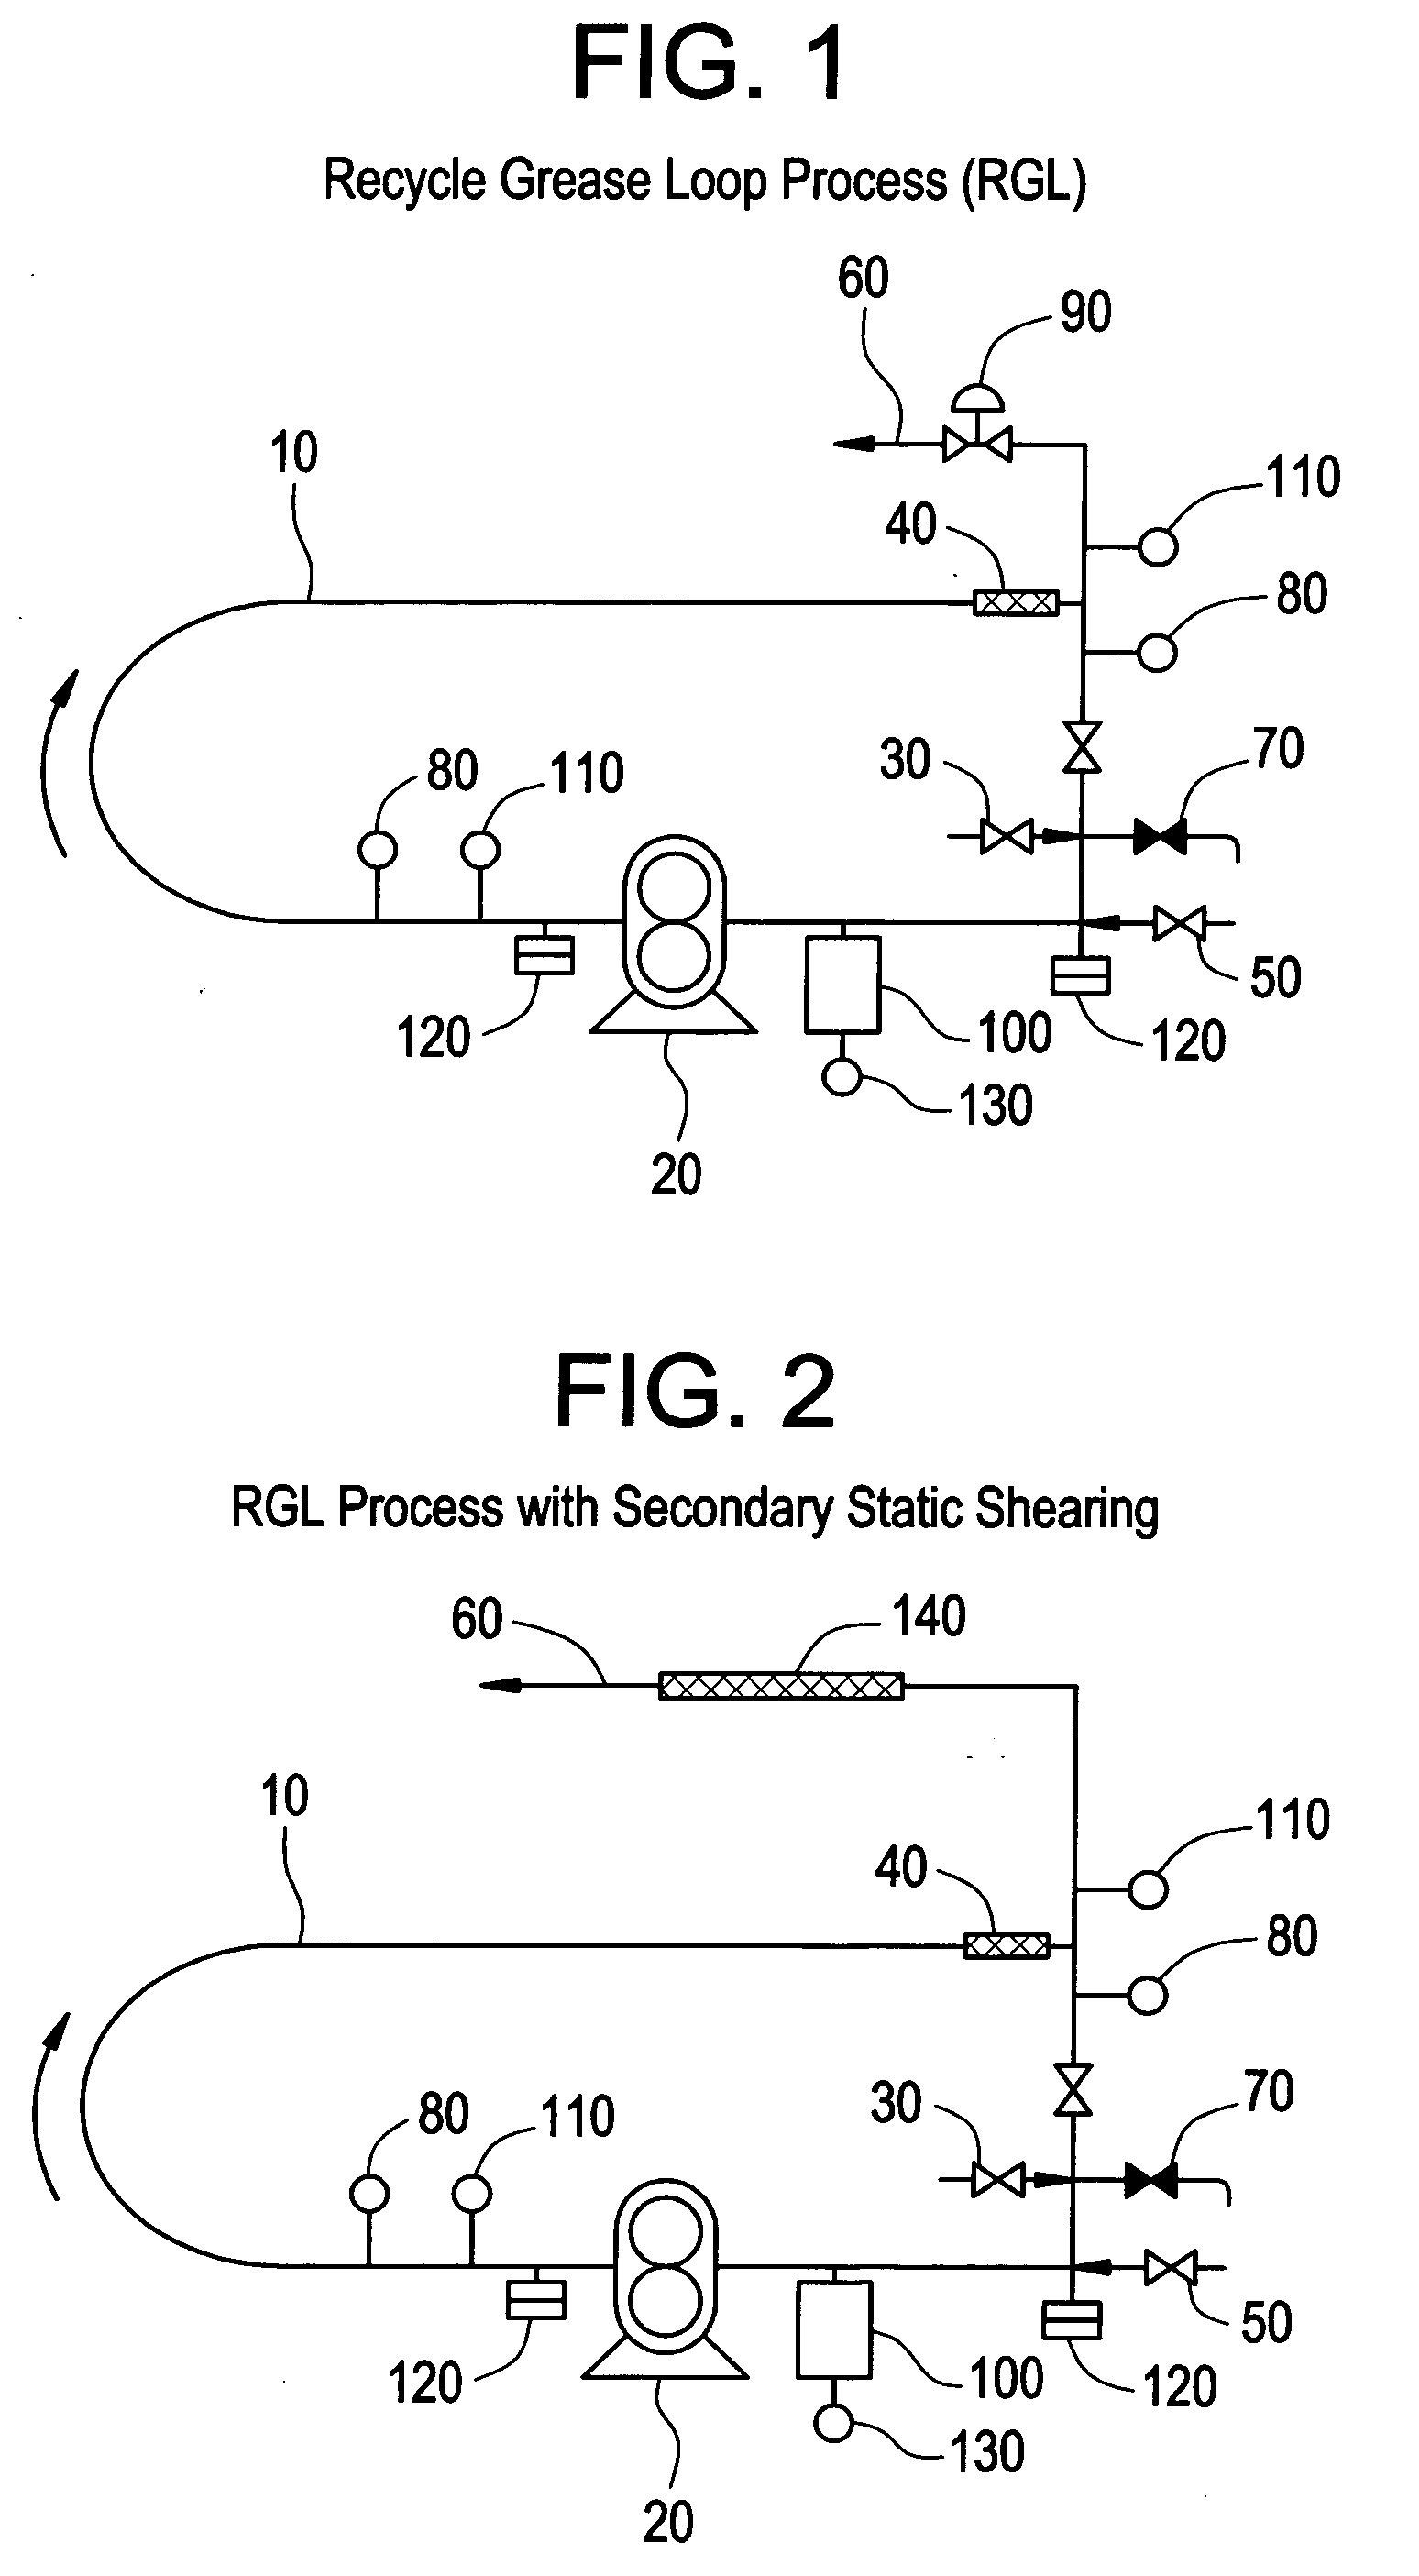 Continuous manufacture of high internal phase ratio emulsions using relatively low-shear and low-temperature processing steps